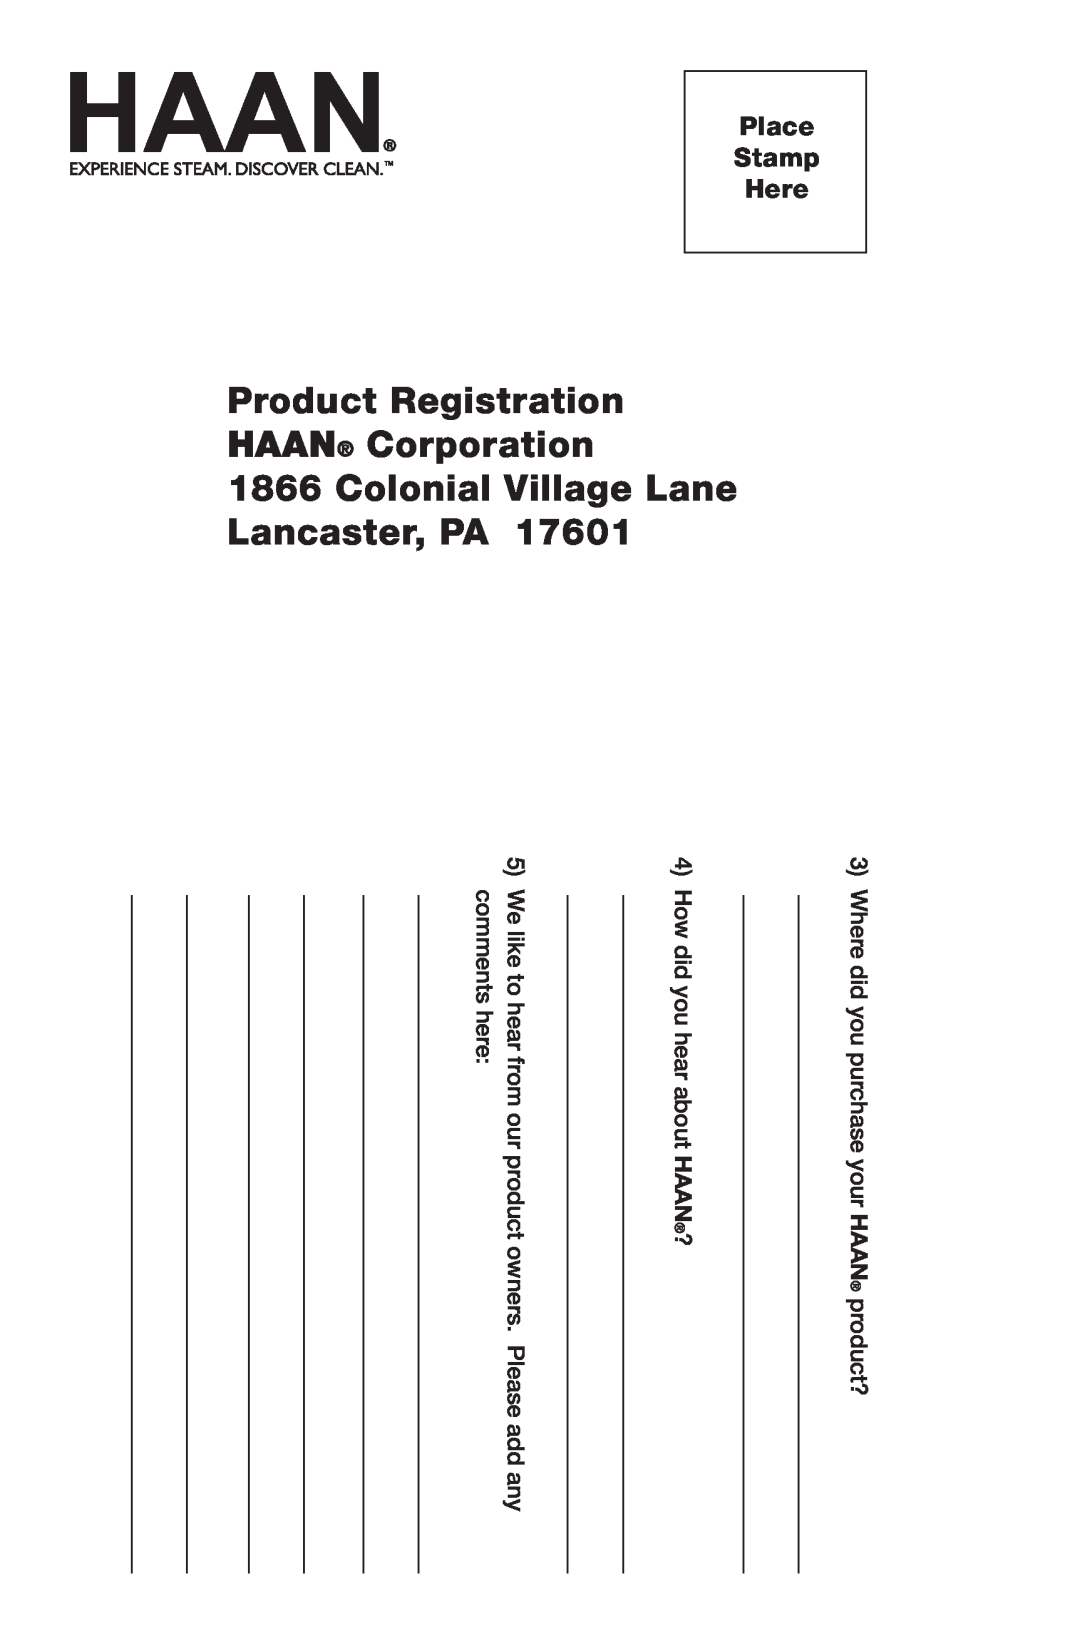 Haan SI-35 instruction manual Product Registration HAAN Corporation, Colonial Village Lane Lancaster, PA, Place Stamp Here 